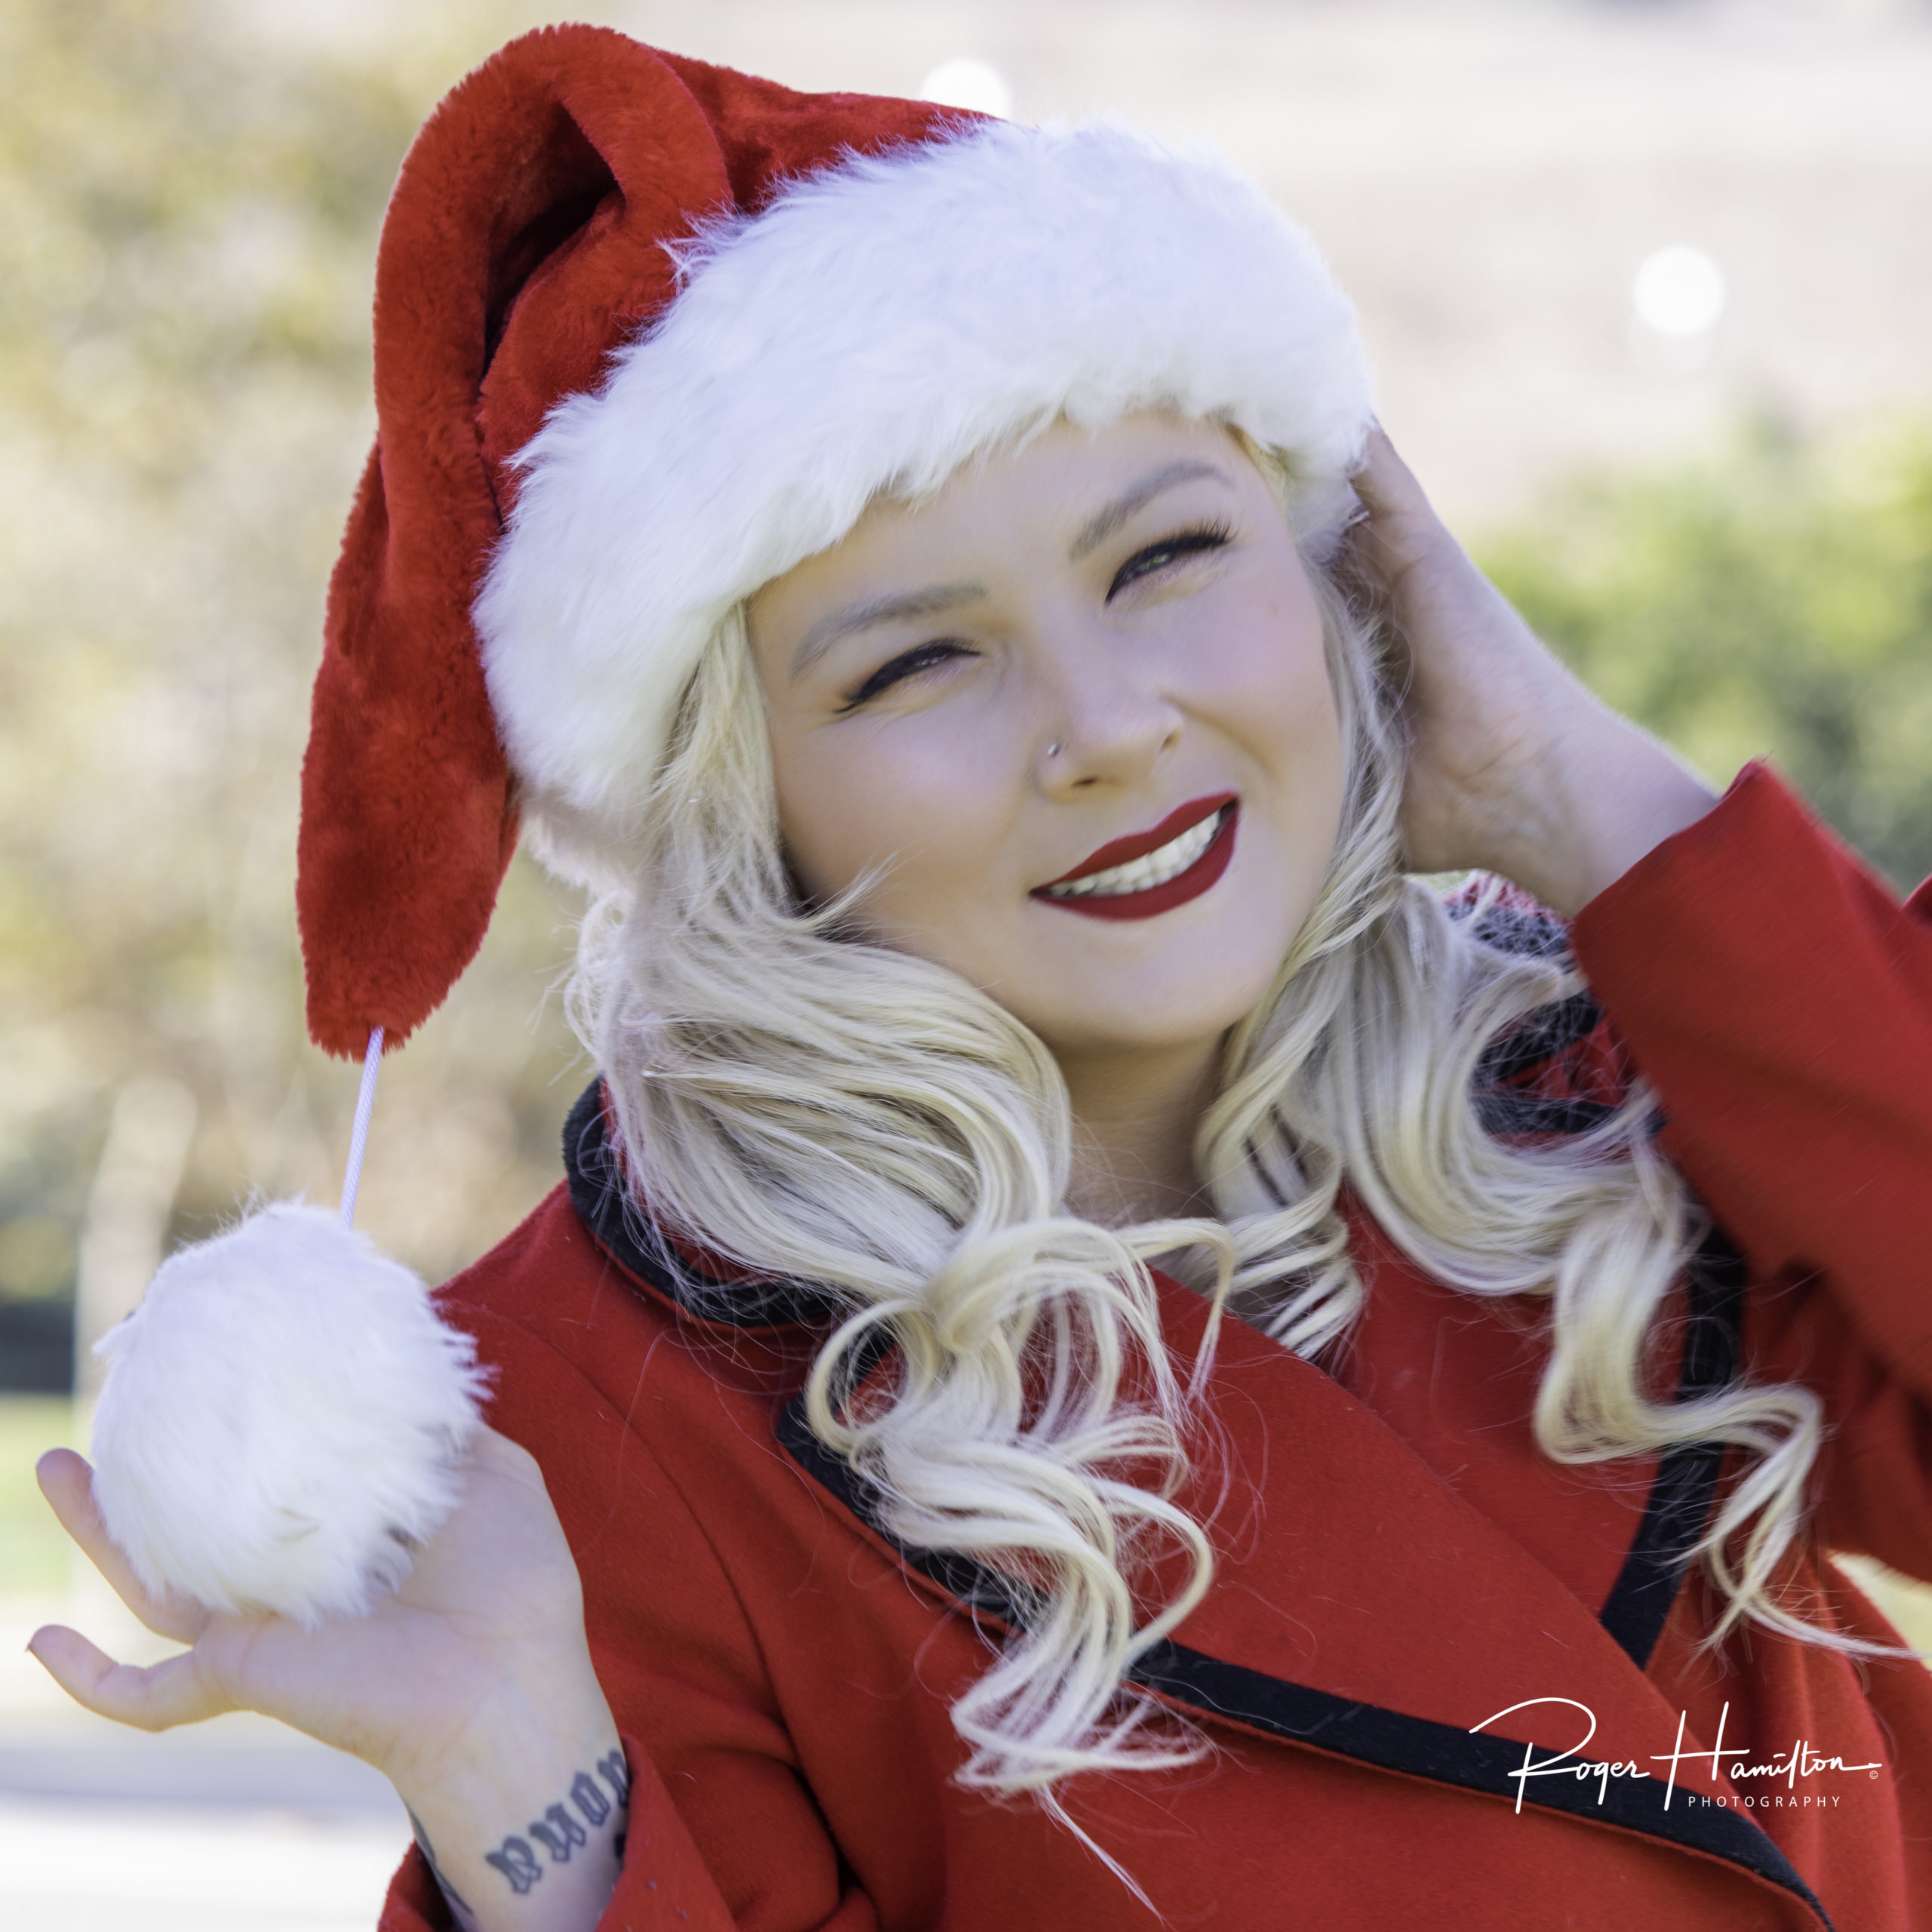 tiera posing for a holiday shoot in pin-up style